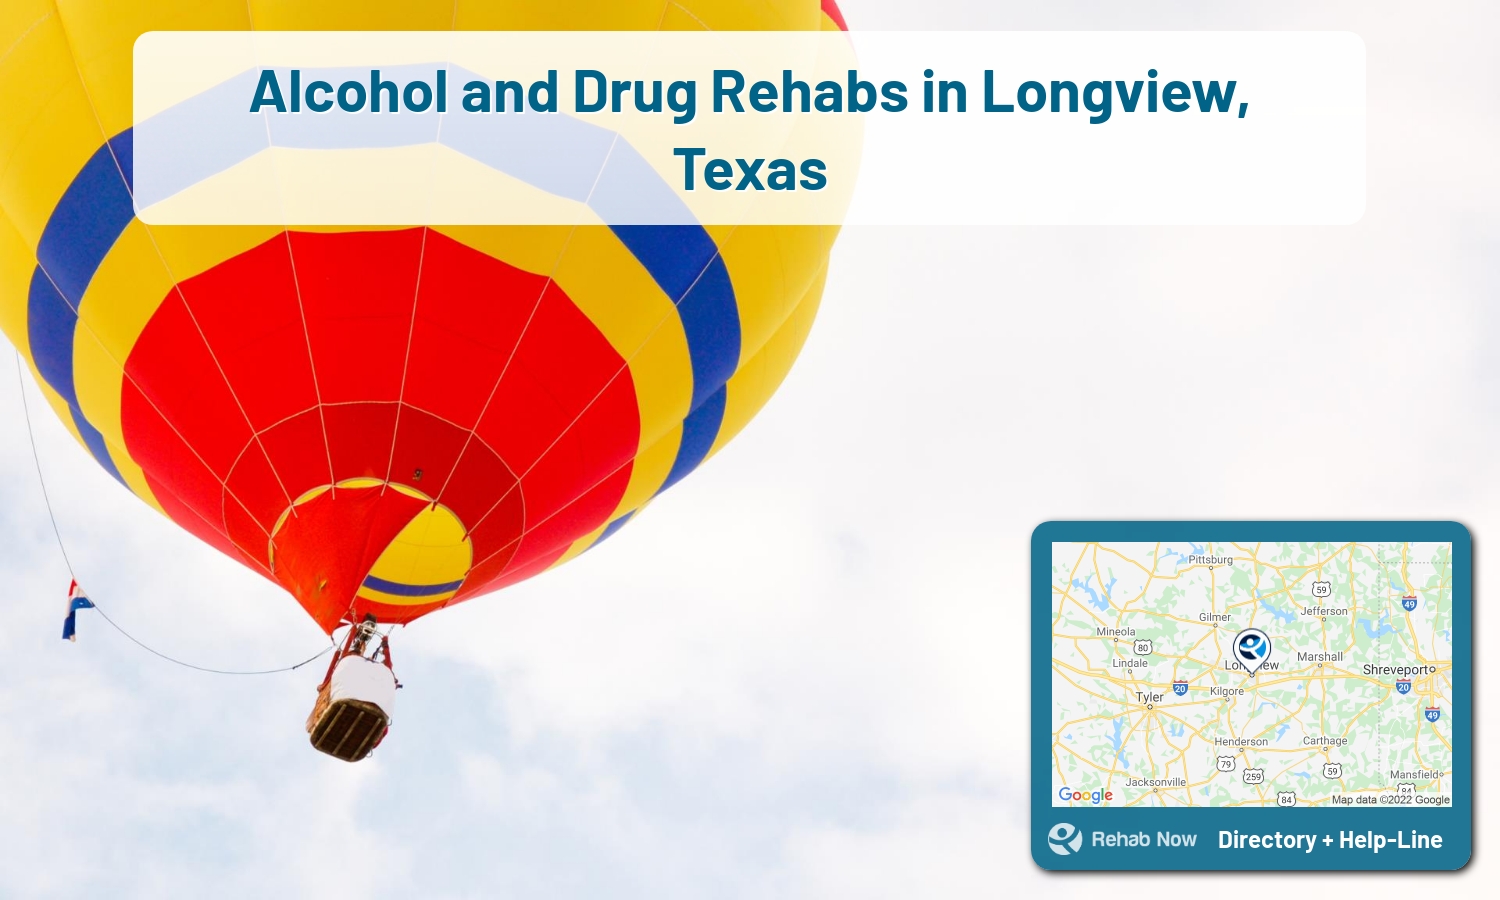 Longview, TX Treatment Centers. Find drug rehab in Longview, Texas, or detox and treatment programs. Get the right help now!